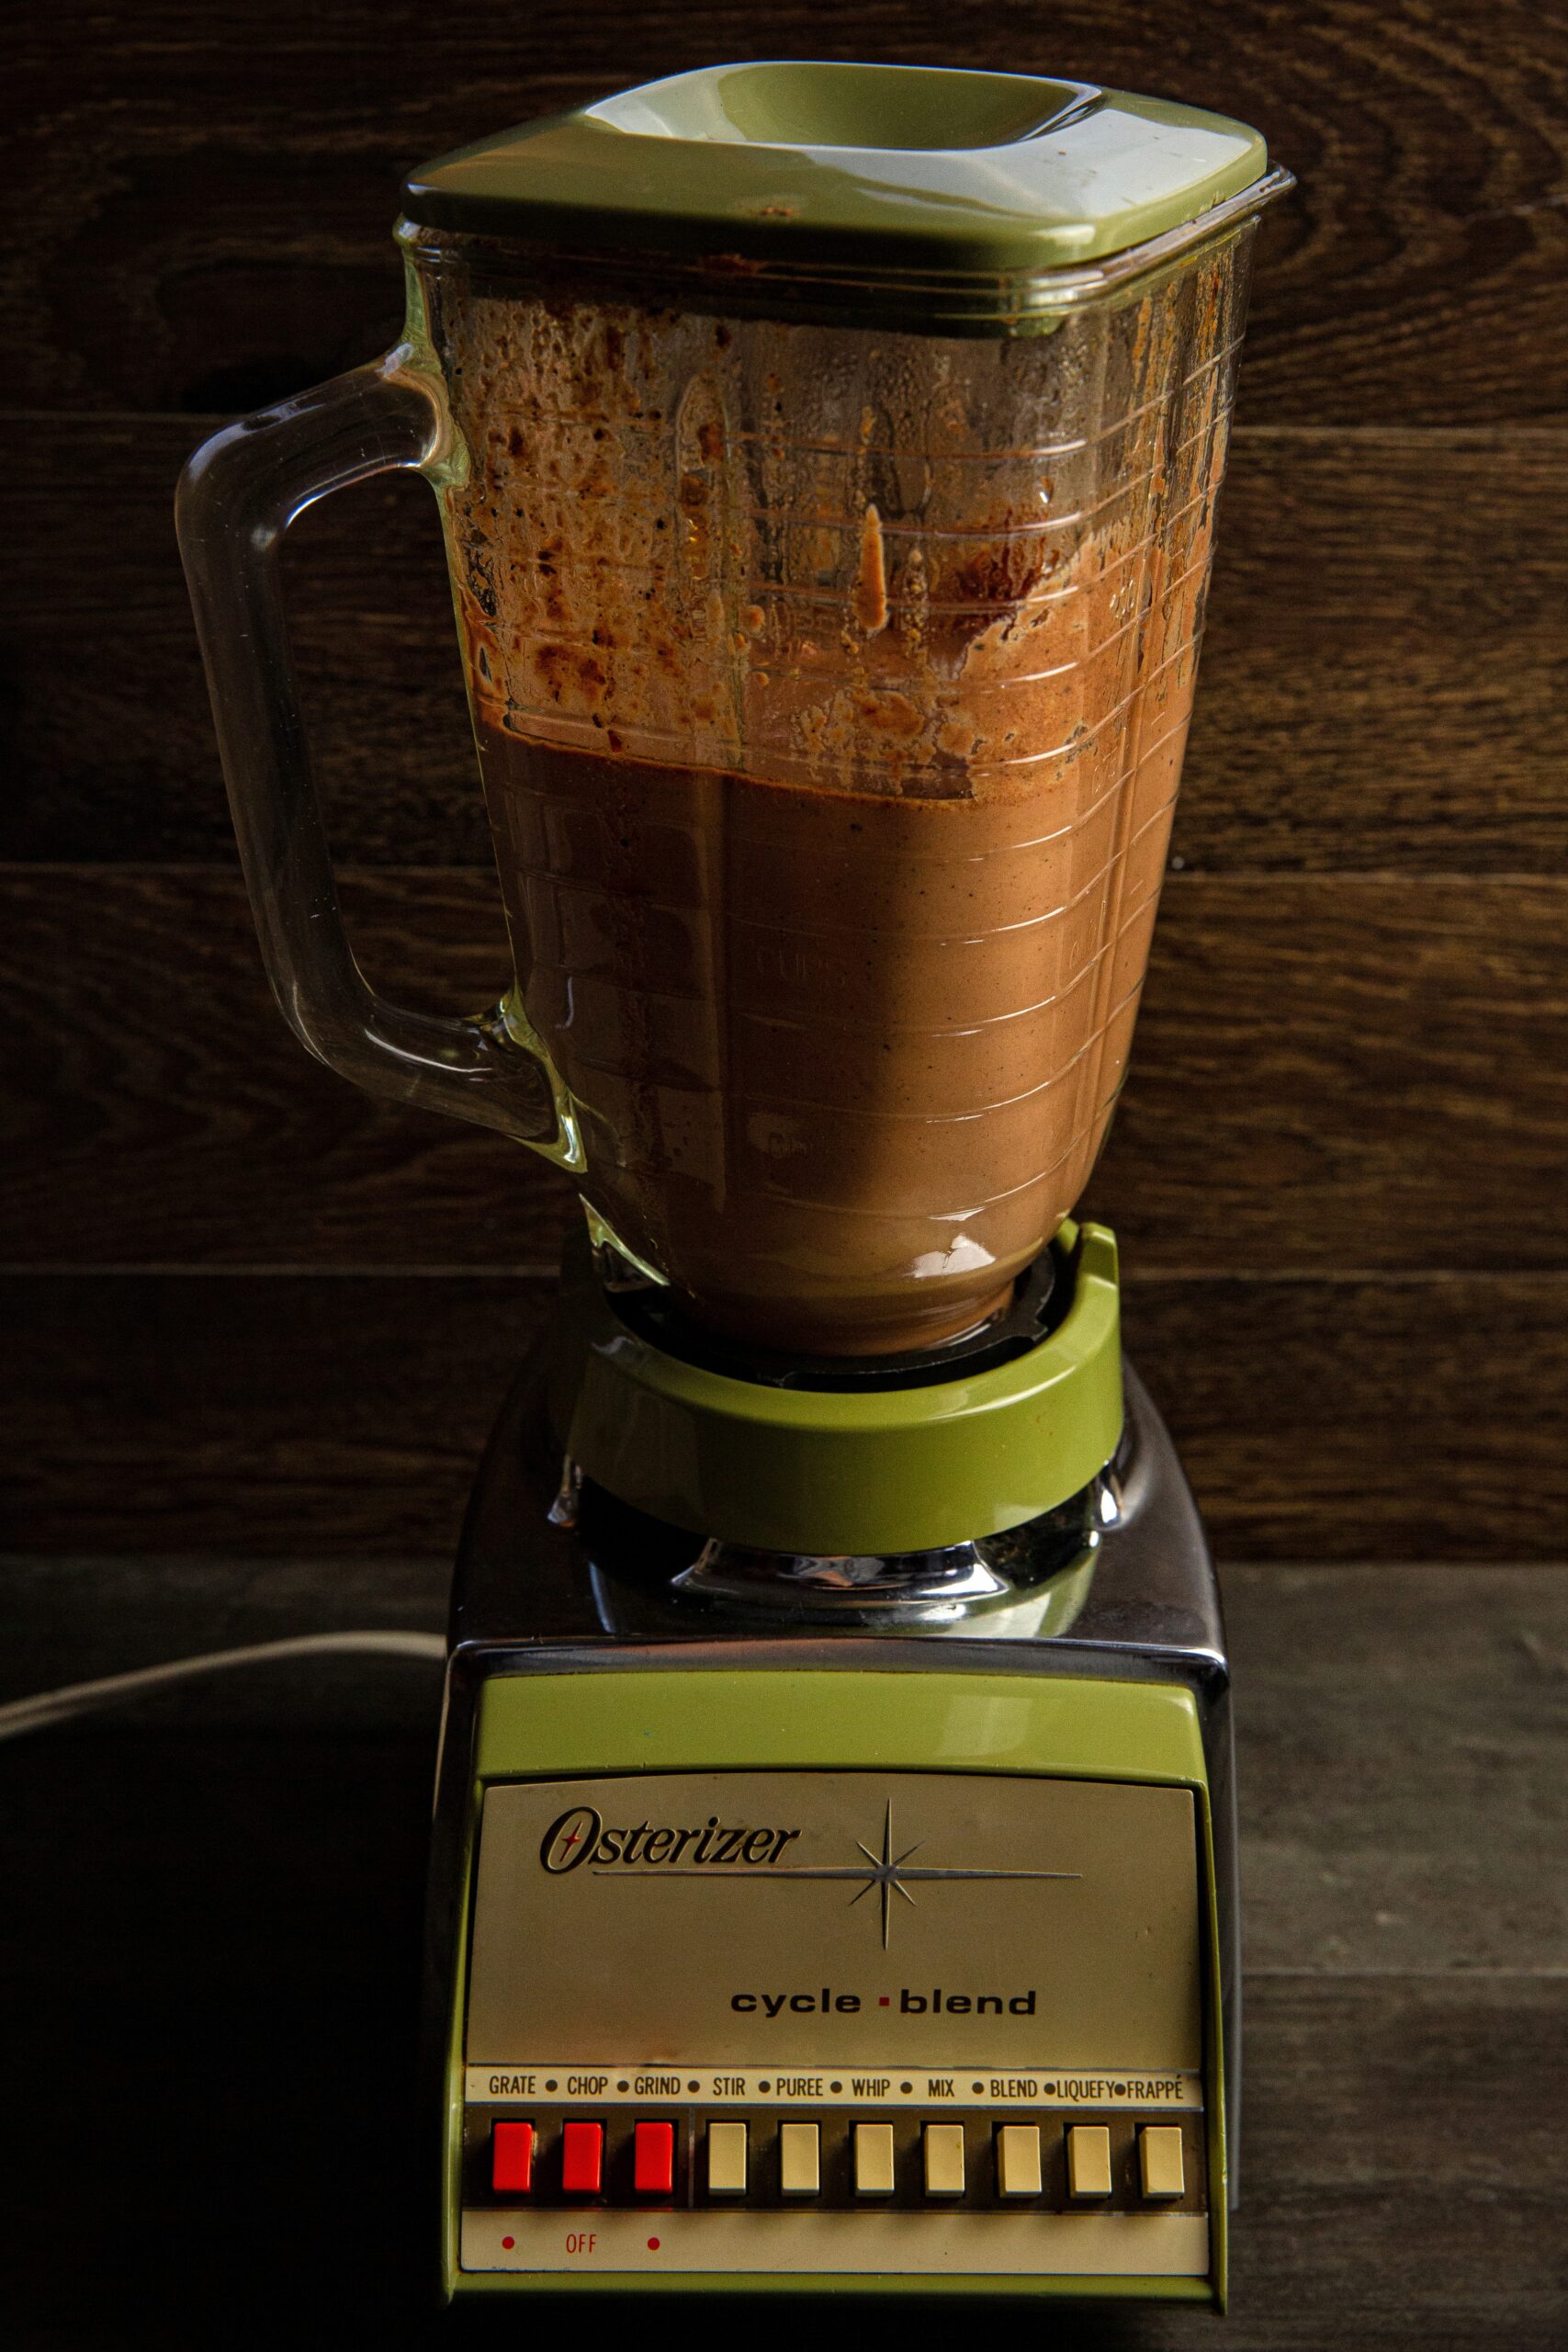 Use a blender, not a food processor, for this recipe.